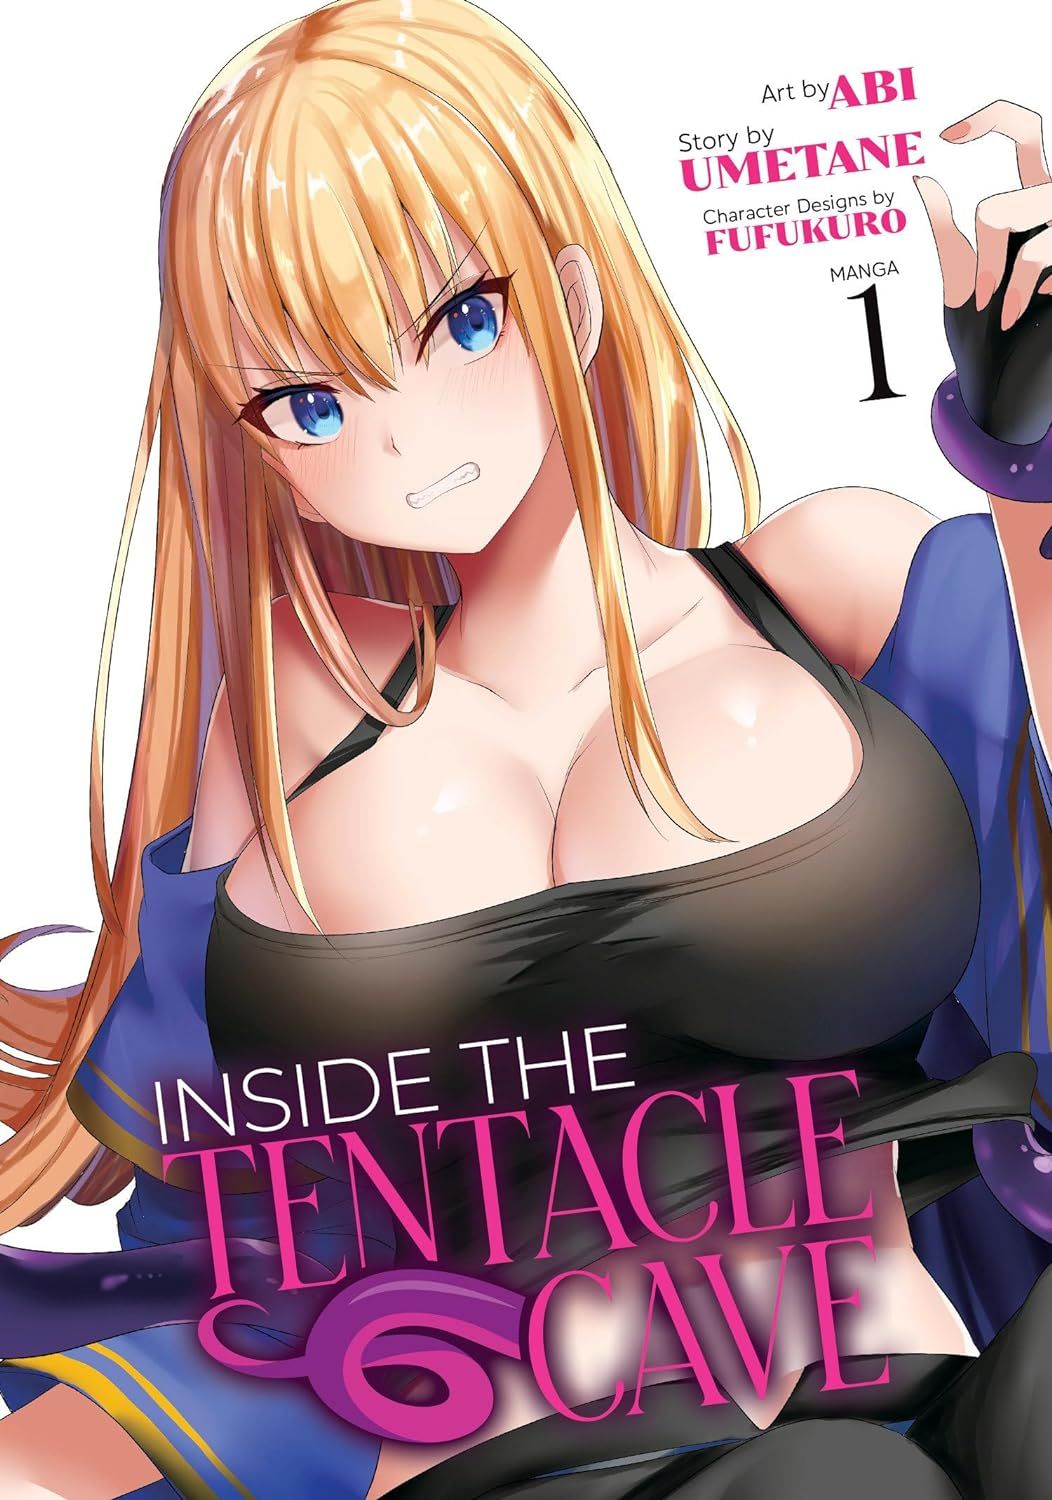 Inside the Tentacle Cave by Umetani and Abi cover